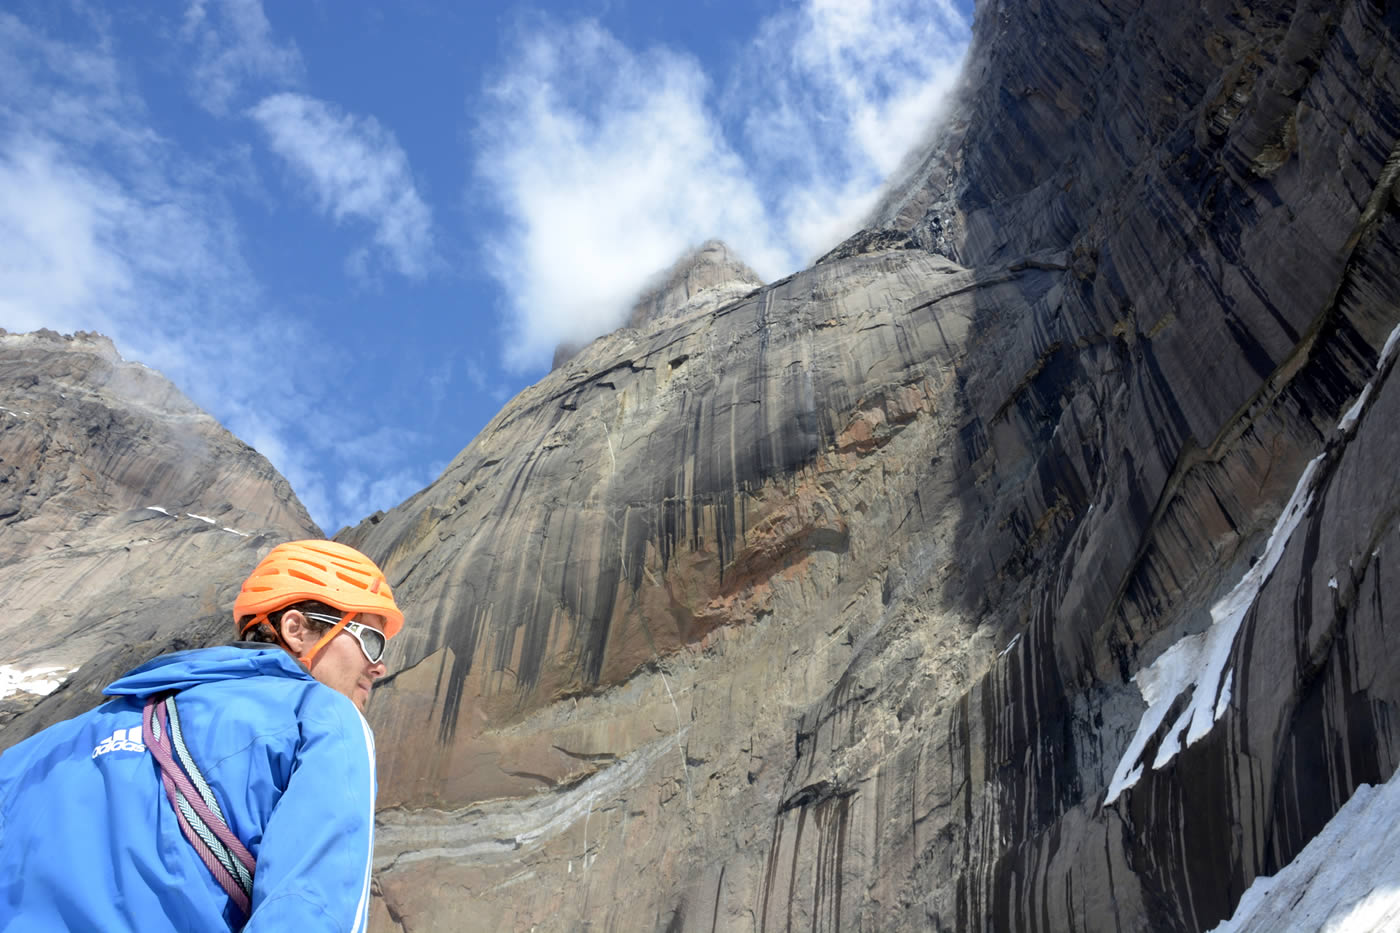 Christian Laddy Ledergerber stands at the foot of the huge overhang in the middle of the wall, with the summit in the clouds. [Photo] Silvan Schuepbach